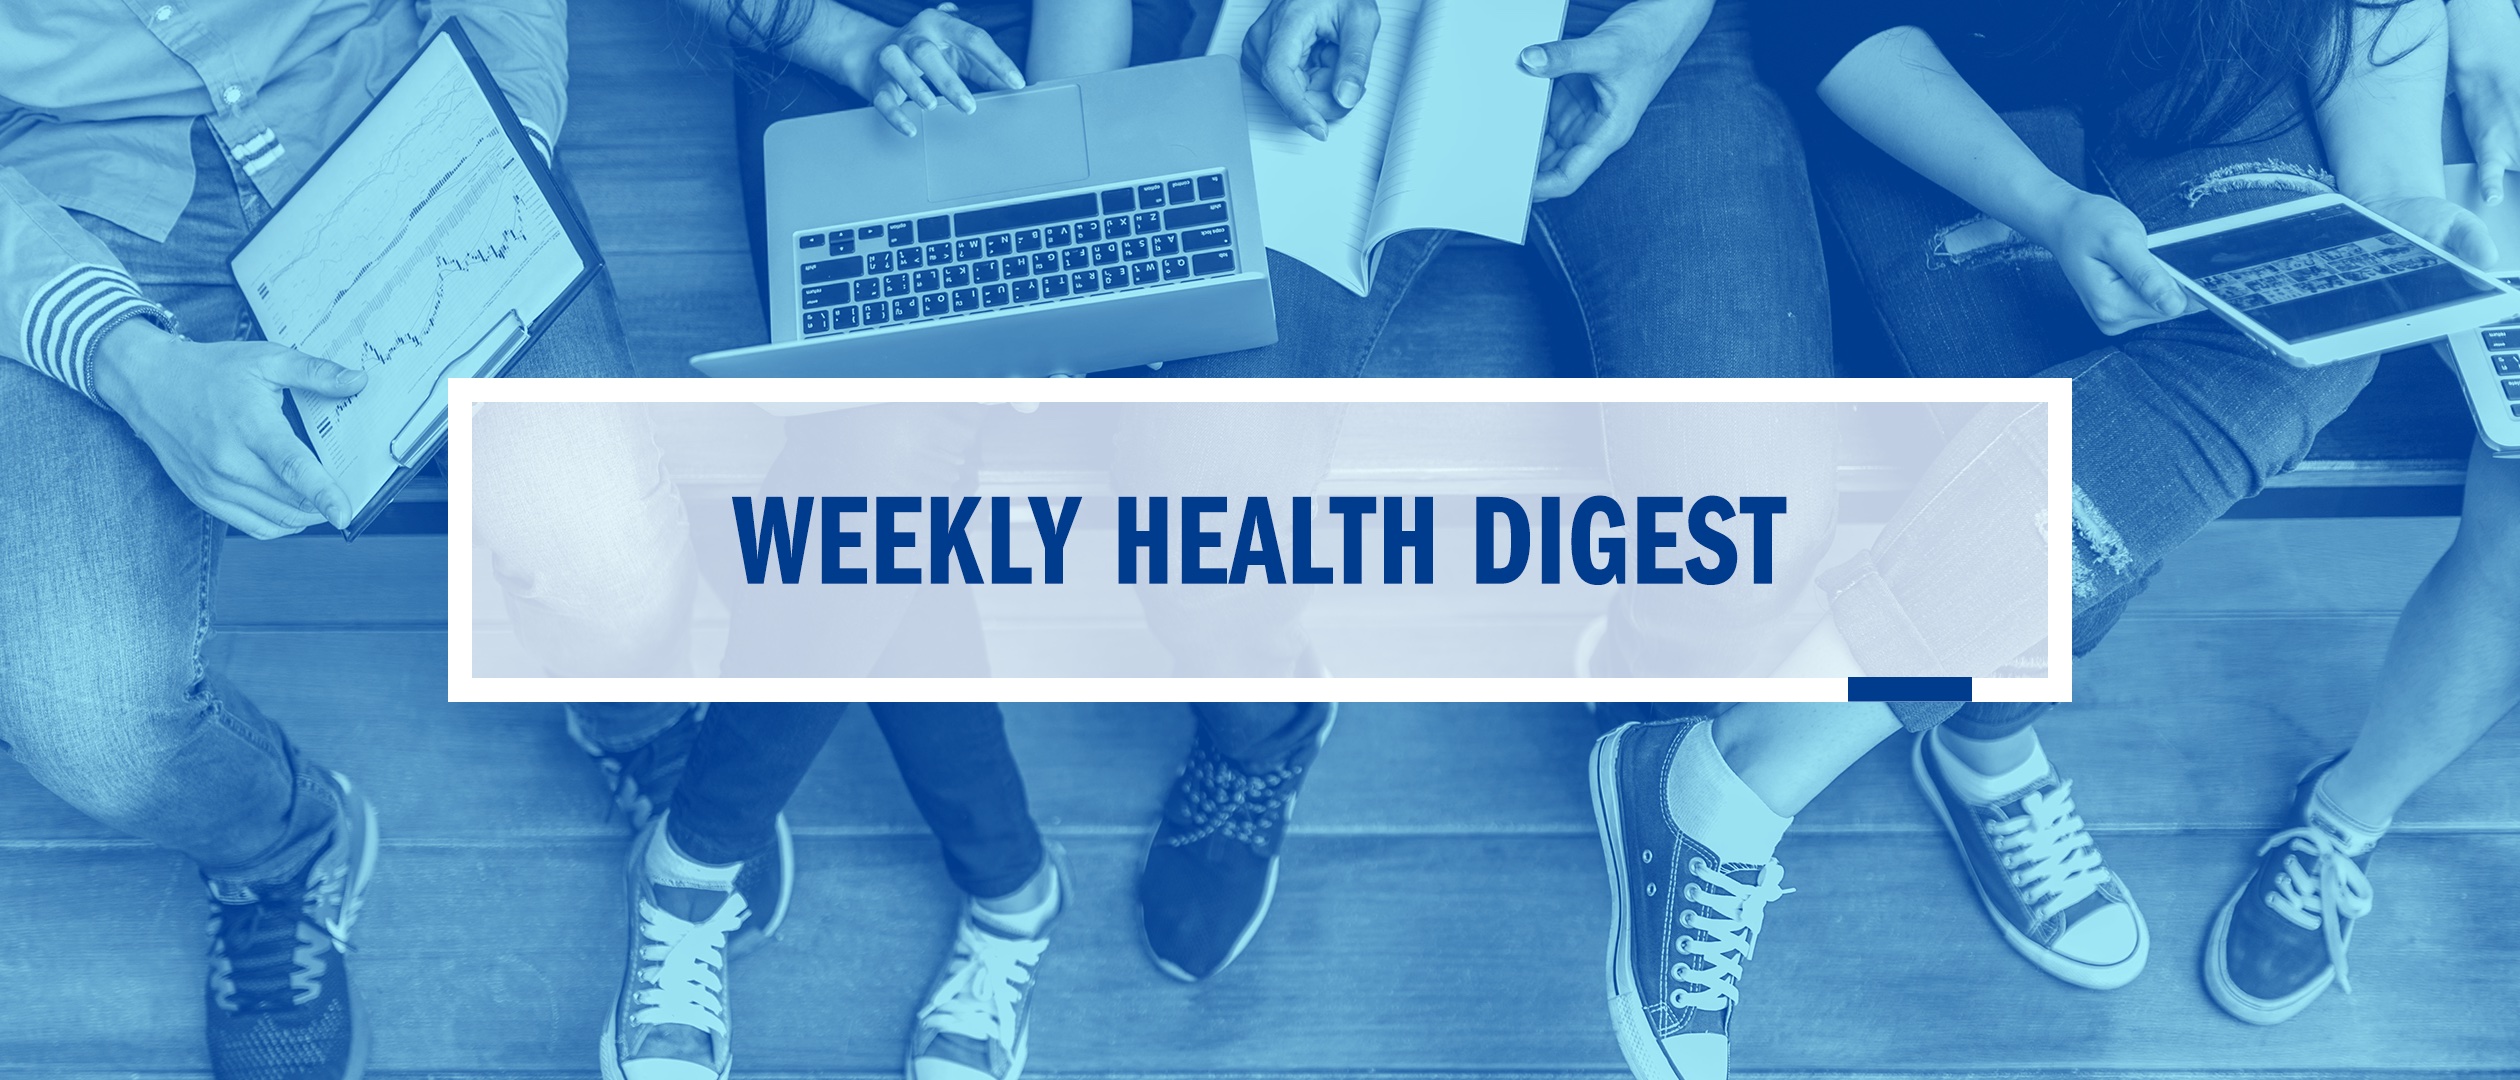 A blue image of 5 people who are holding on their laps clipboards, printouts, laptops and a tablet, surmounted by a semi-opaque white box containing the words "Weekly Health Digest"